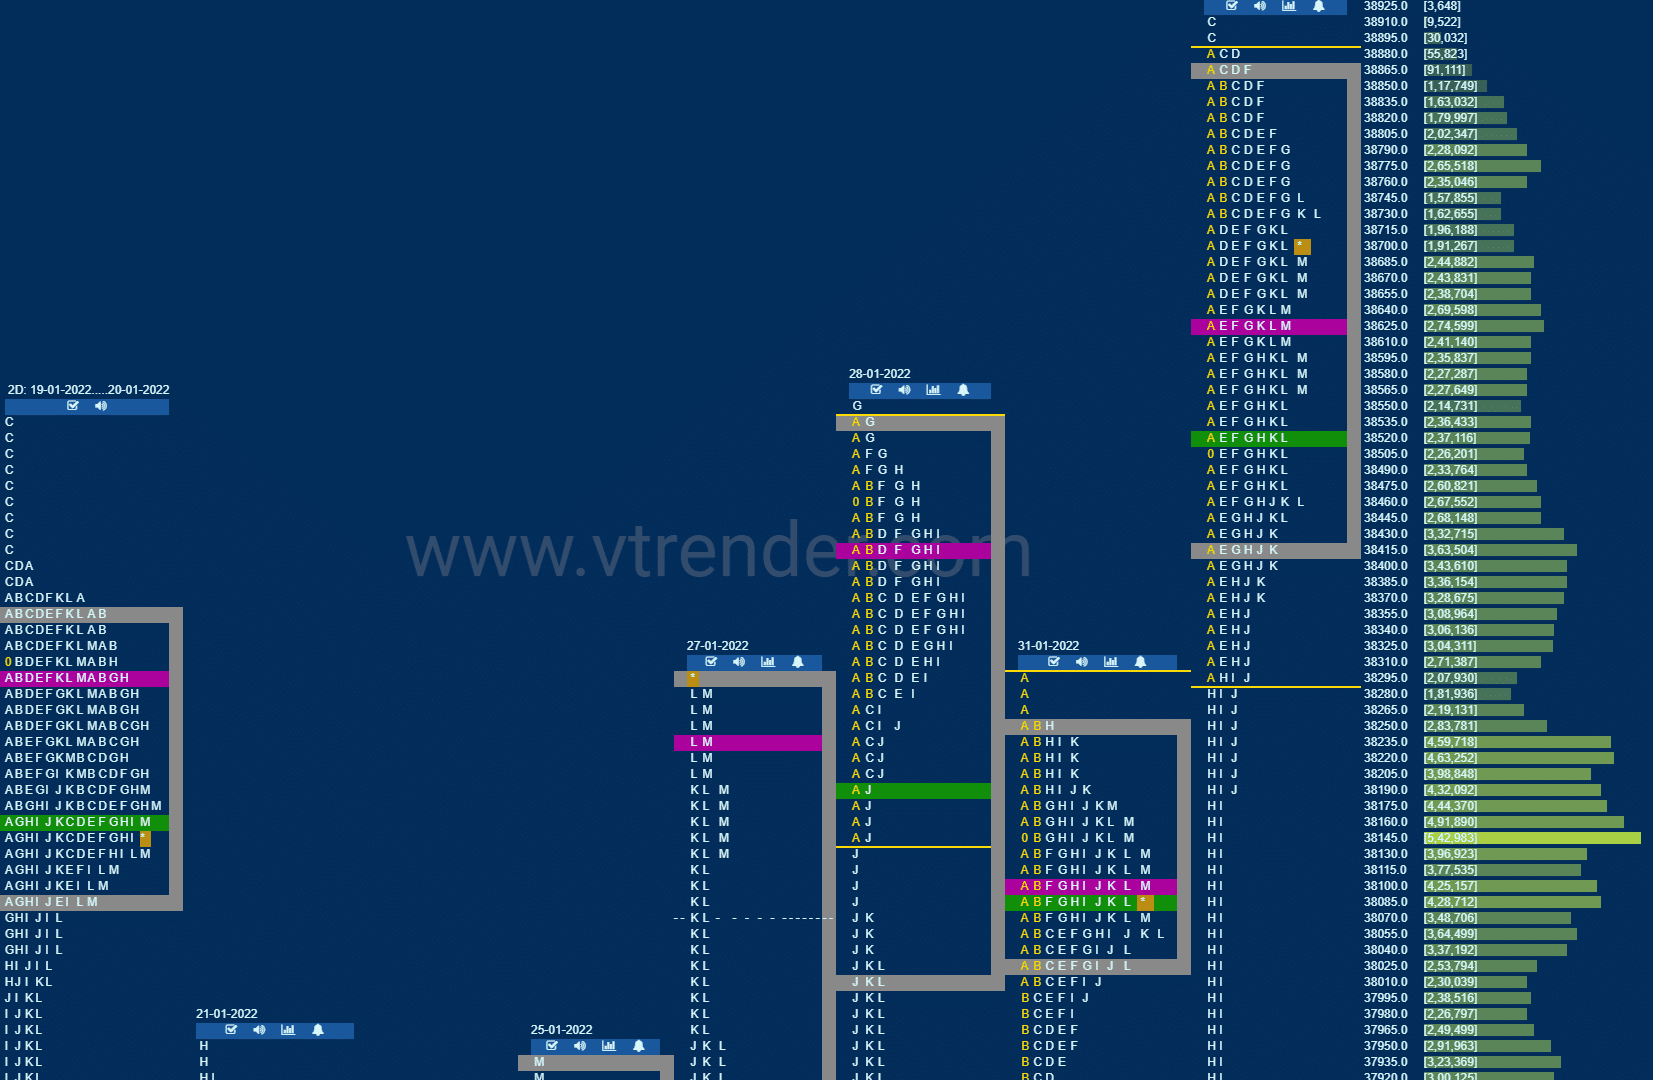 Bnf Market Profile Analysis Dated 01St February 2022 Banknifty Futures, Charts, Day Trading, Intraday Trading, Intraday Trading Strategies, Market Profile, Market Profile Trading Strategies, Nifty Futures, Order Flow Analysis, Support And Resistance, Technical Analysis, Trading Strategies, Volume Profile Trading